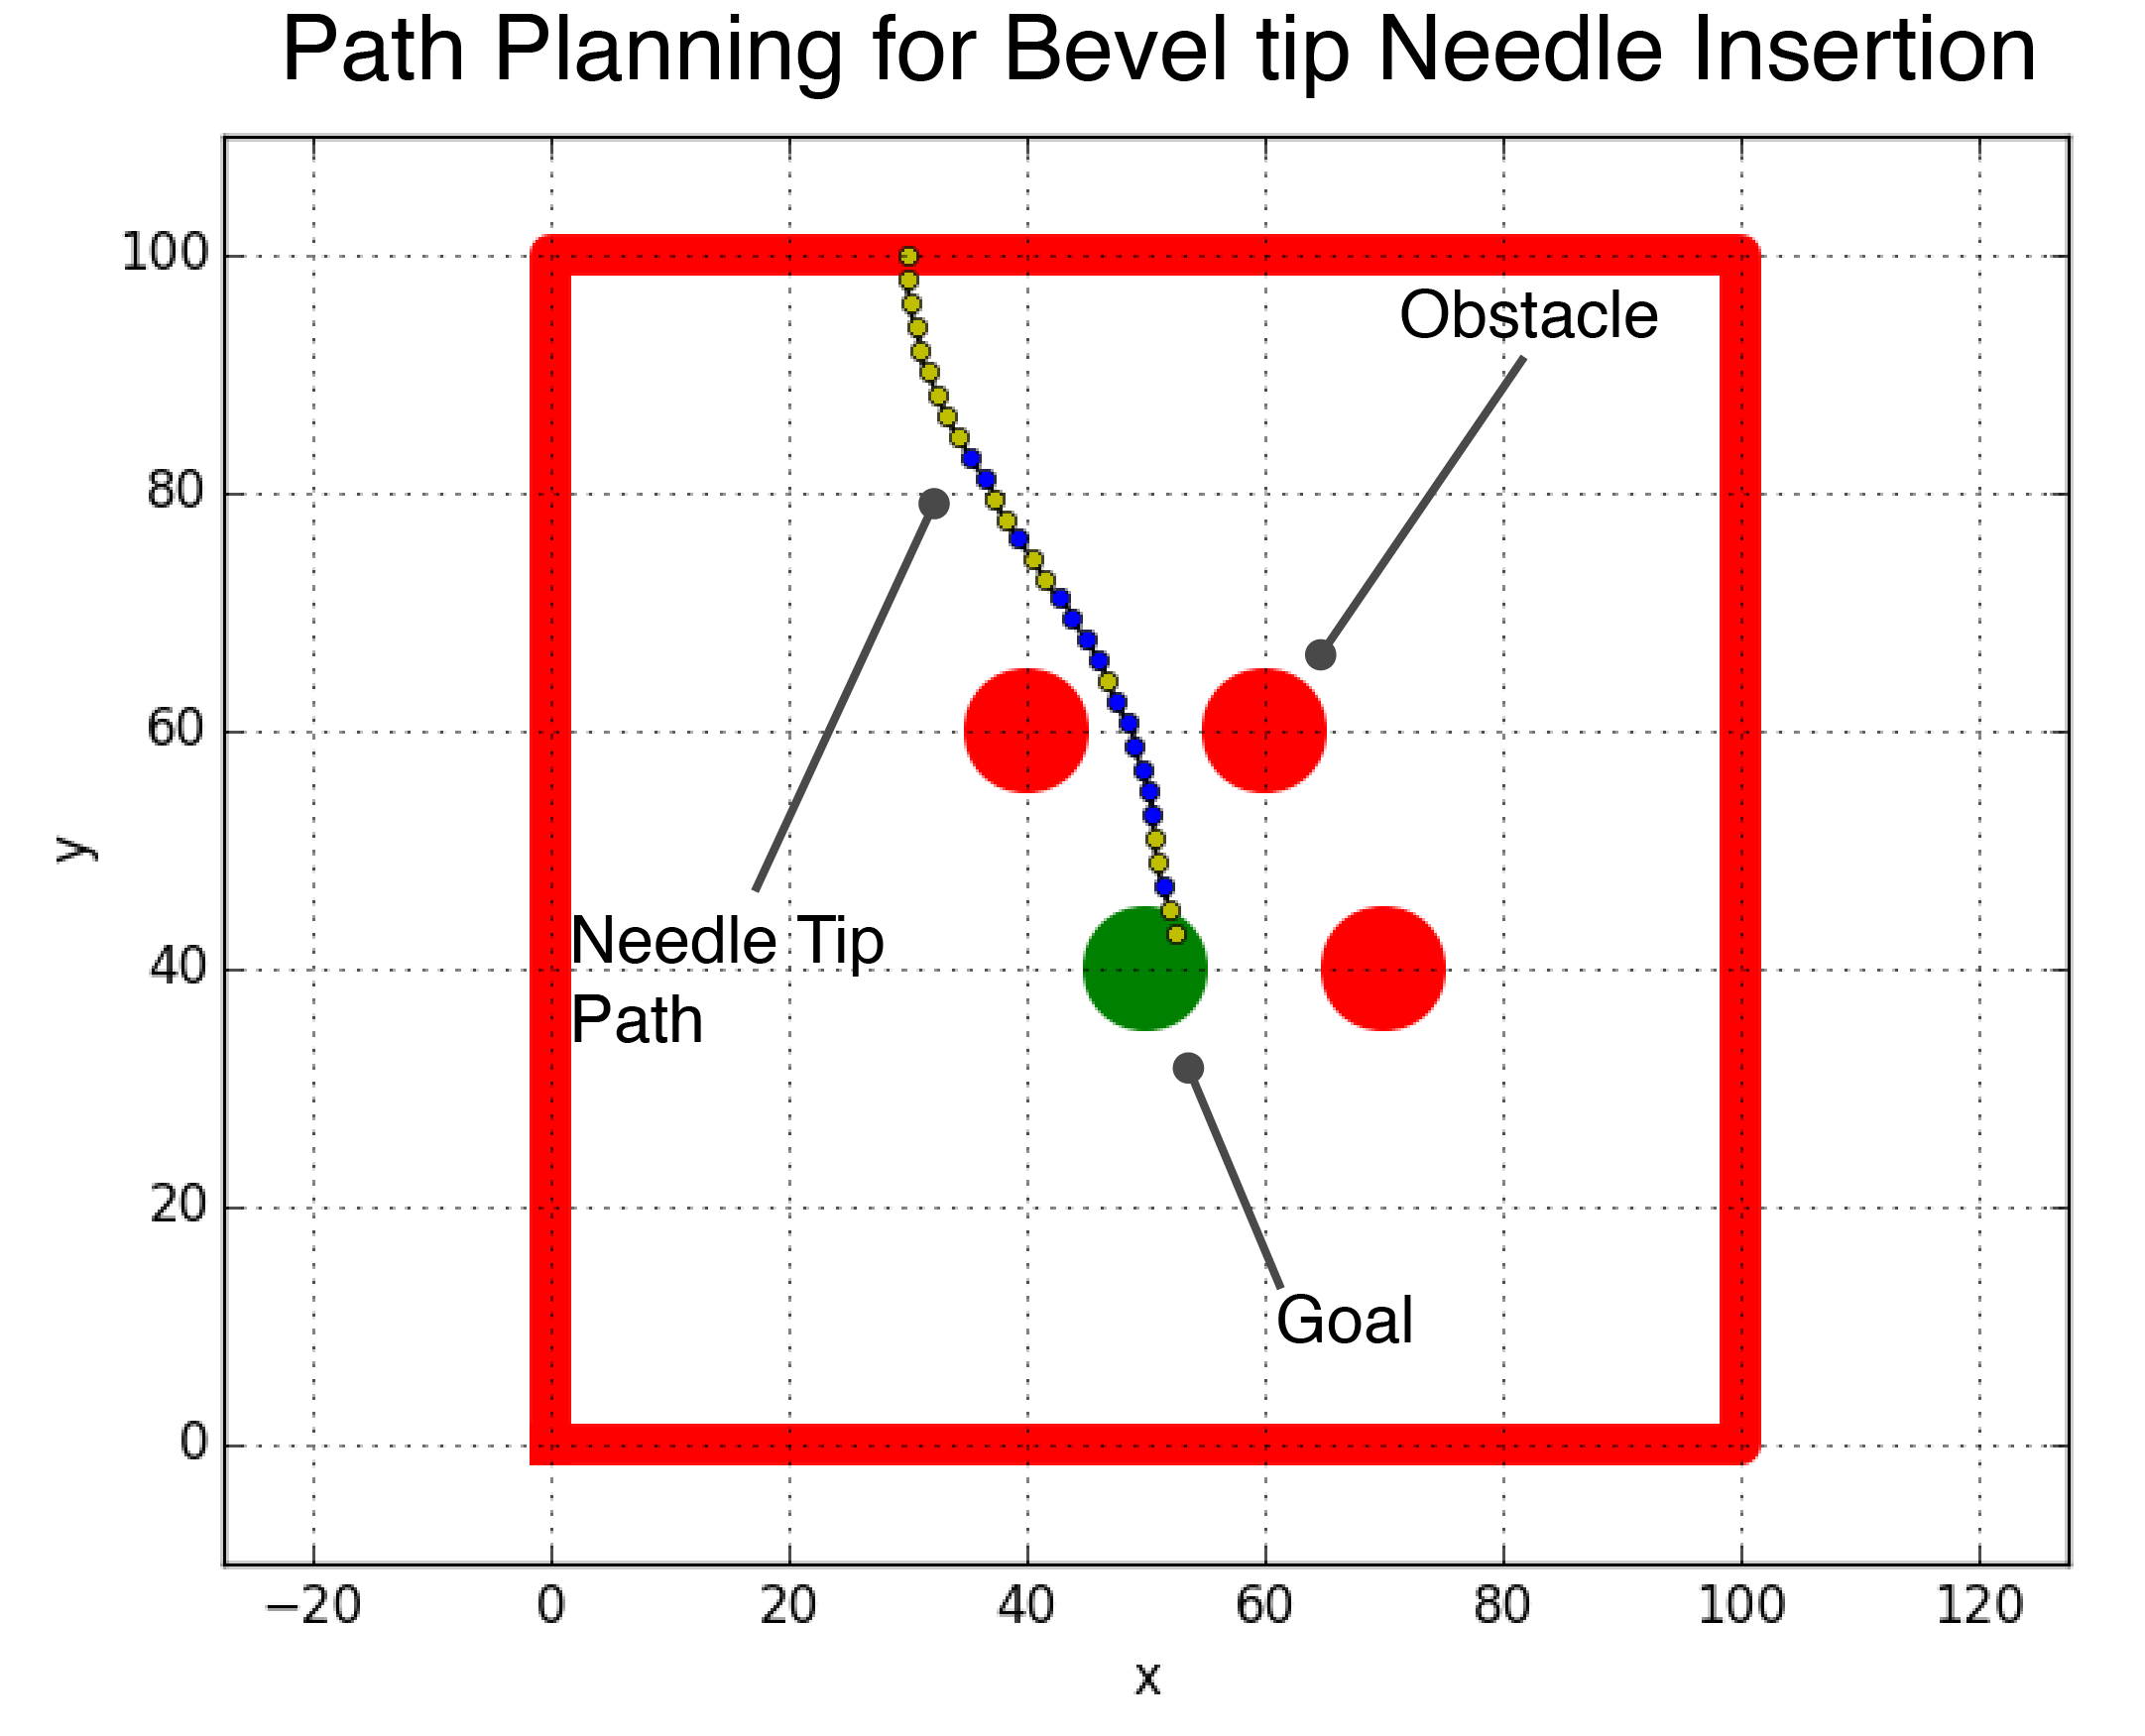 A plot showing a generated needle insertion path that avoids obstacles to reach a goal tip position